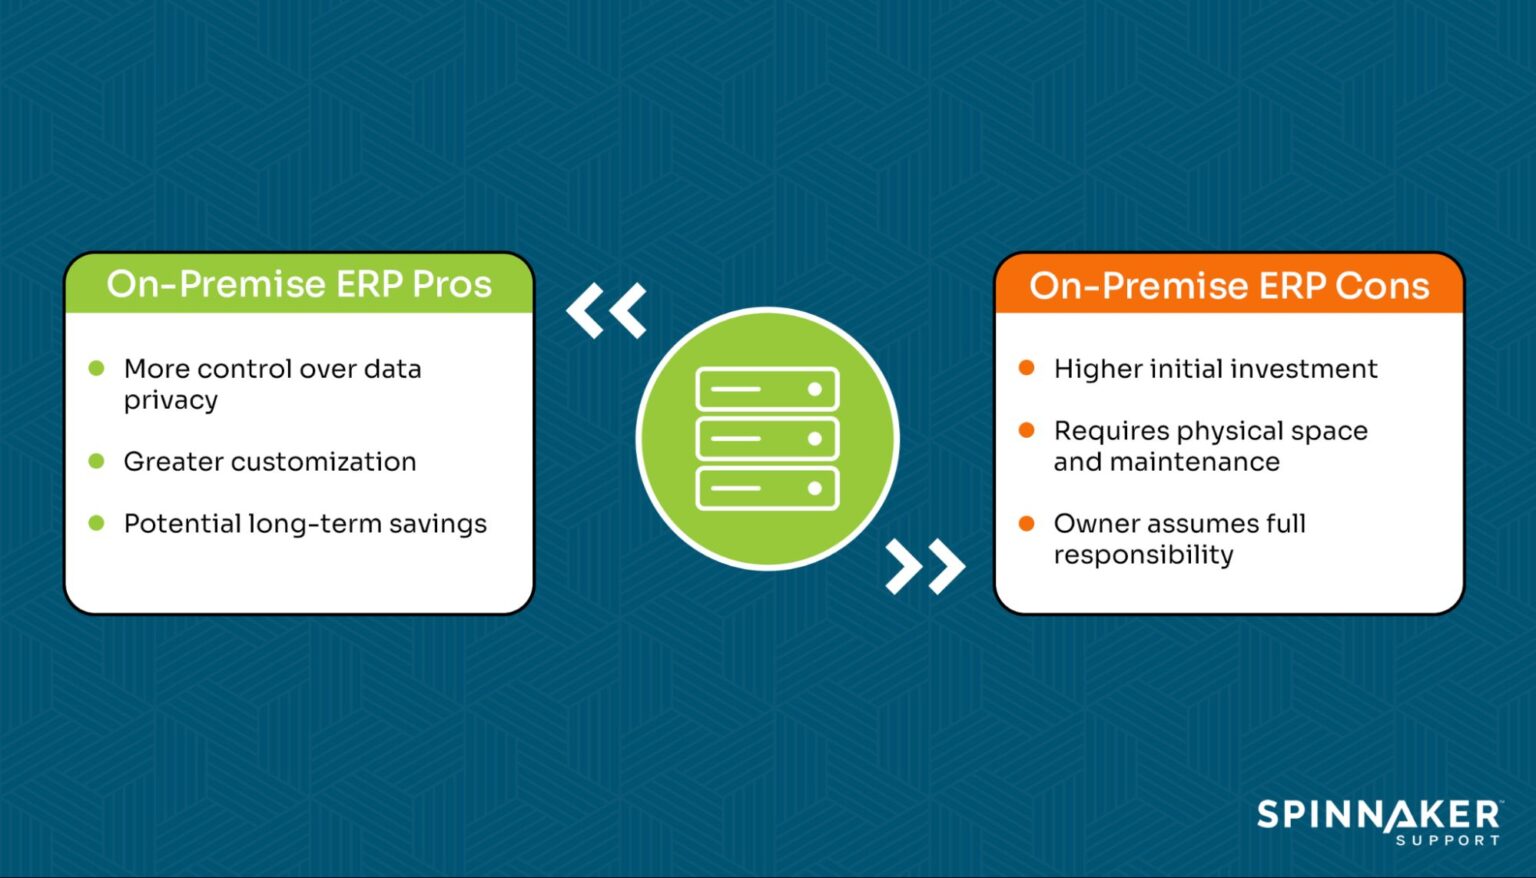 Advantages and disadvantages of on-premise ERP?